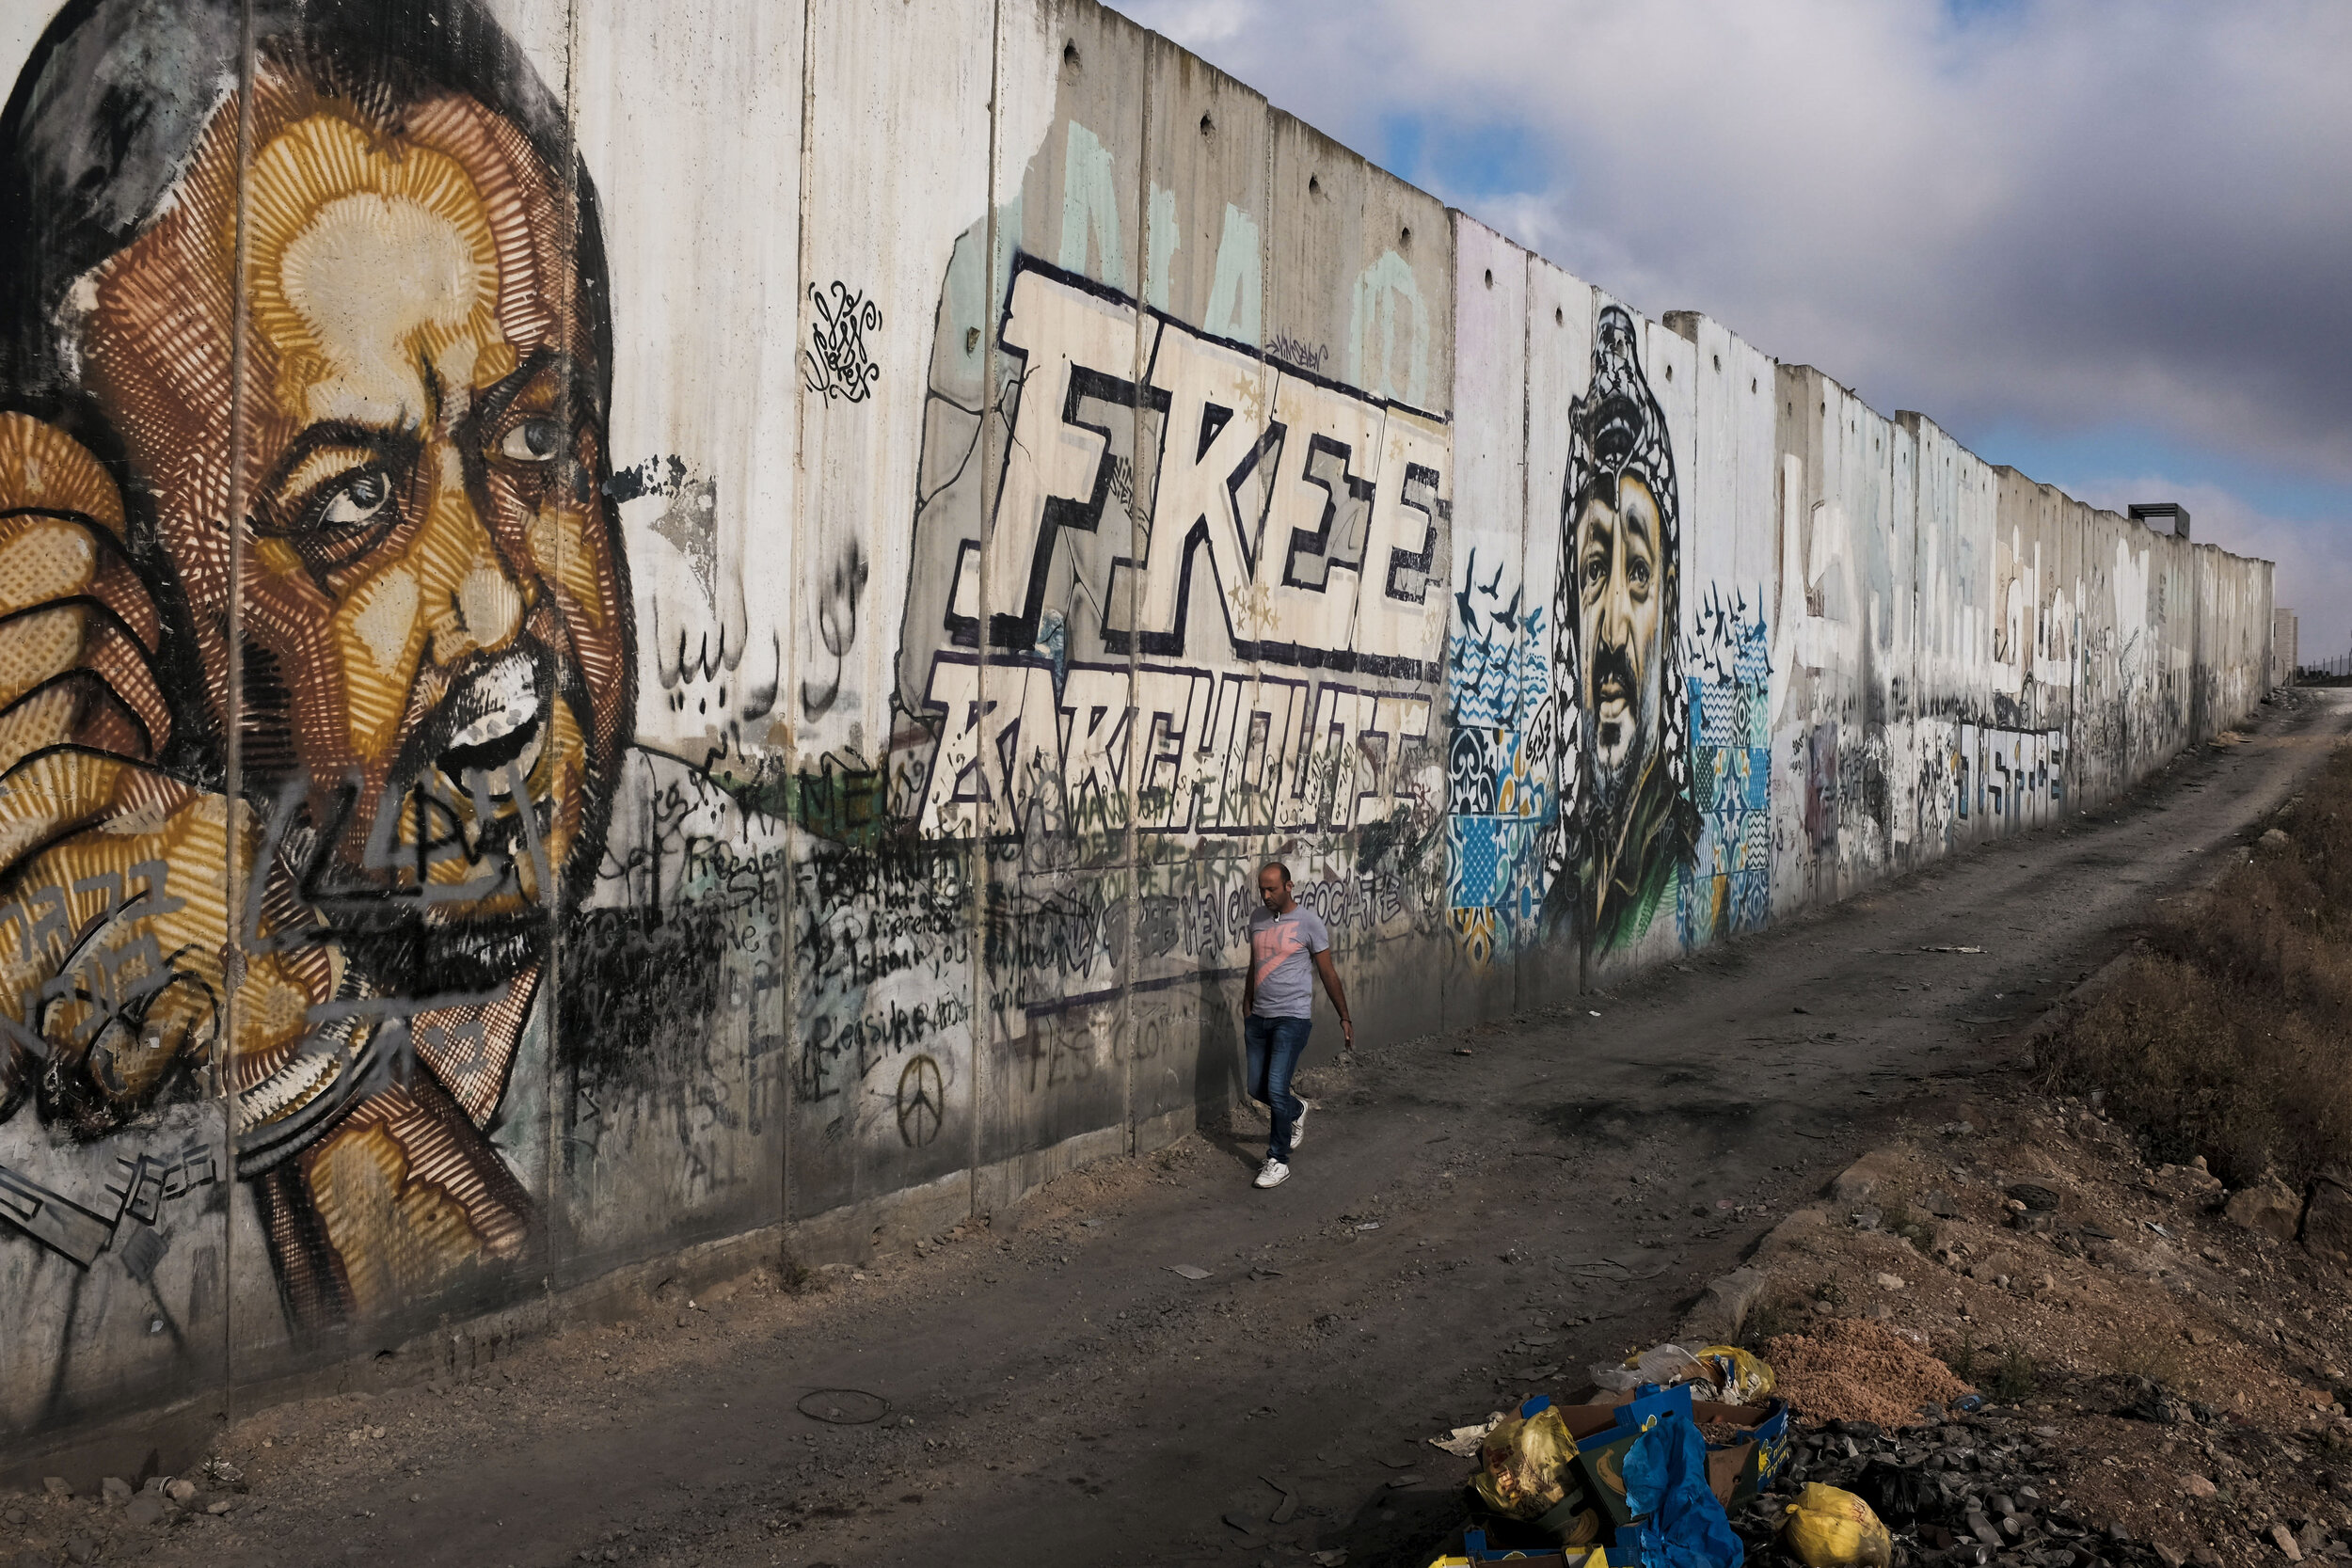  Murals of political prisoners and former leaders adorn the giant stone wall which separates Israel from the Occupied West Bank near Qalandia Checkpoint.  